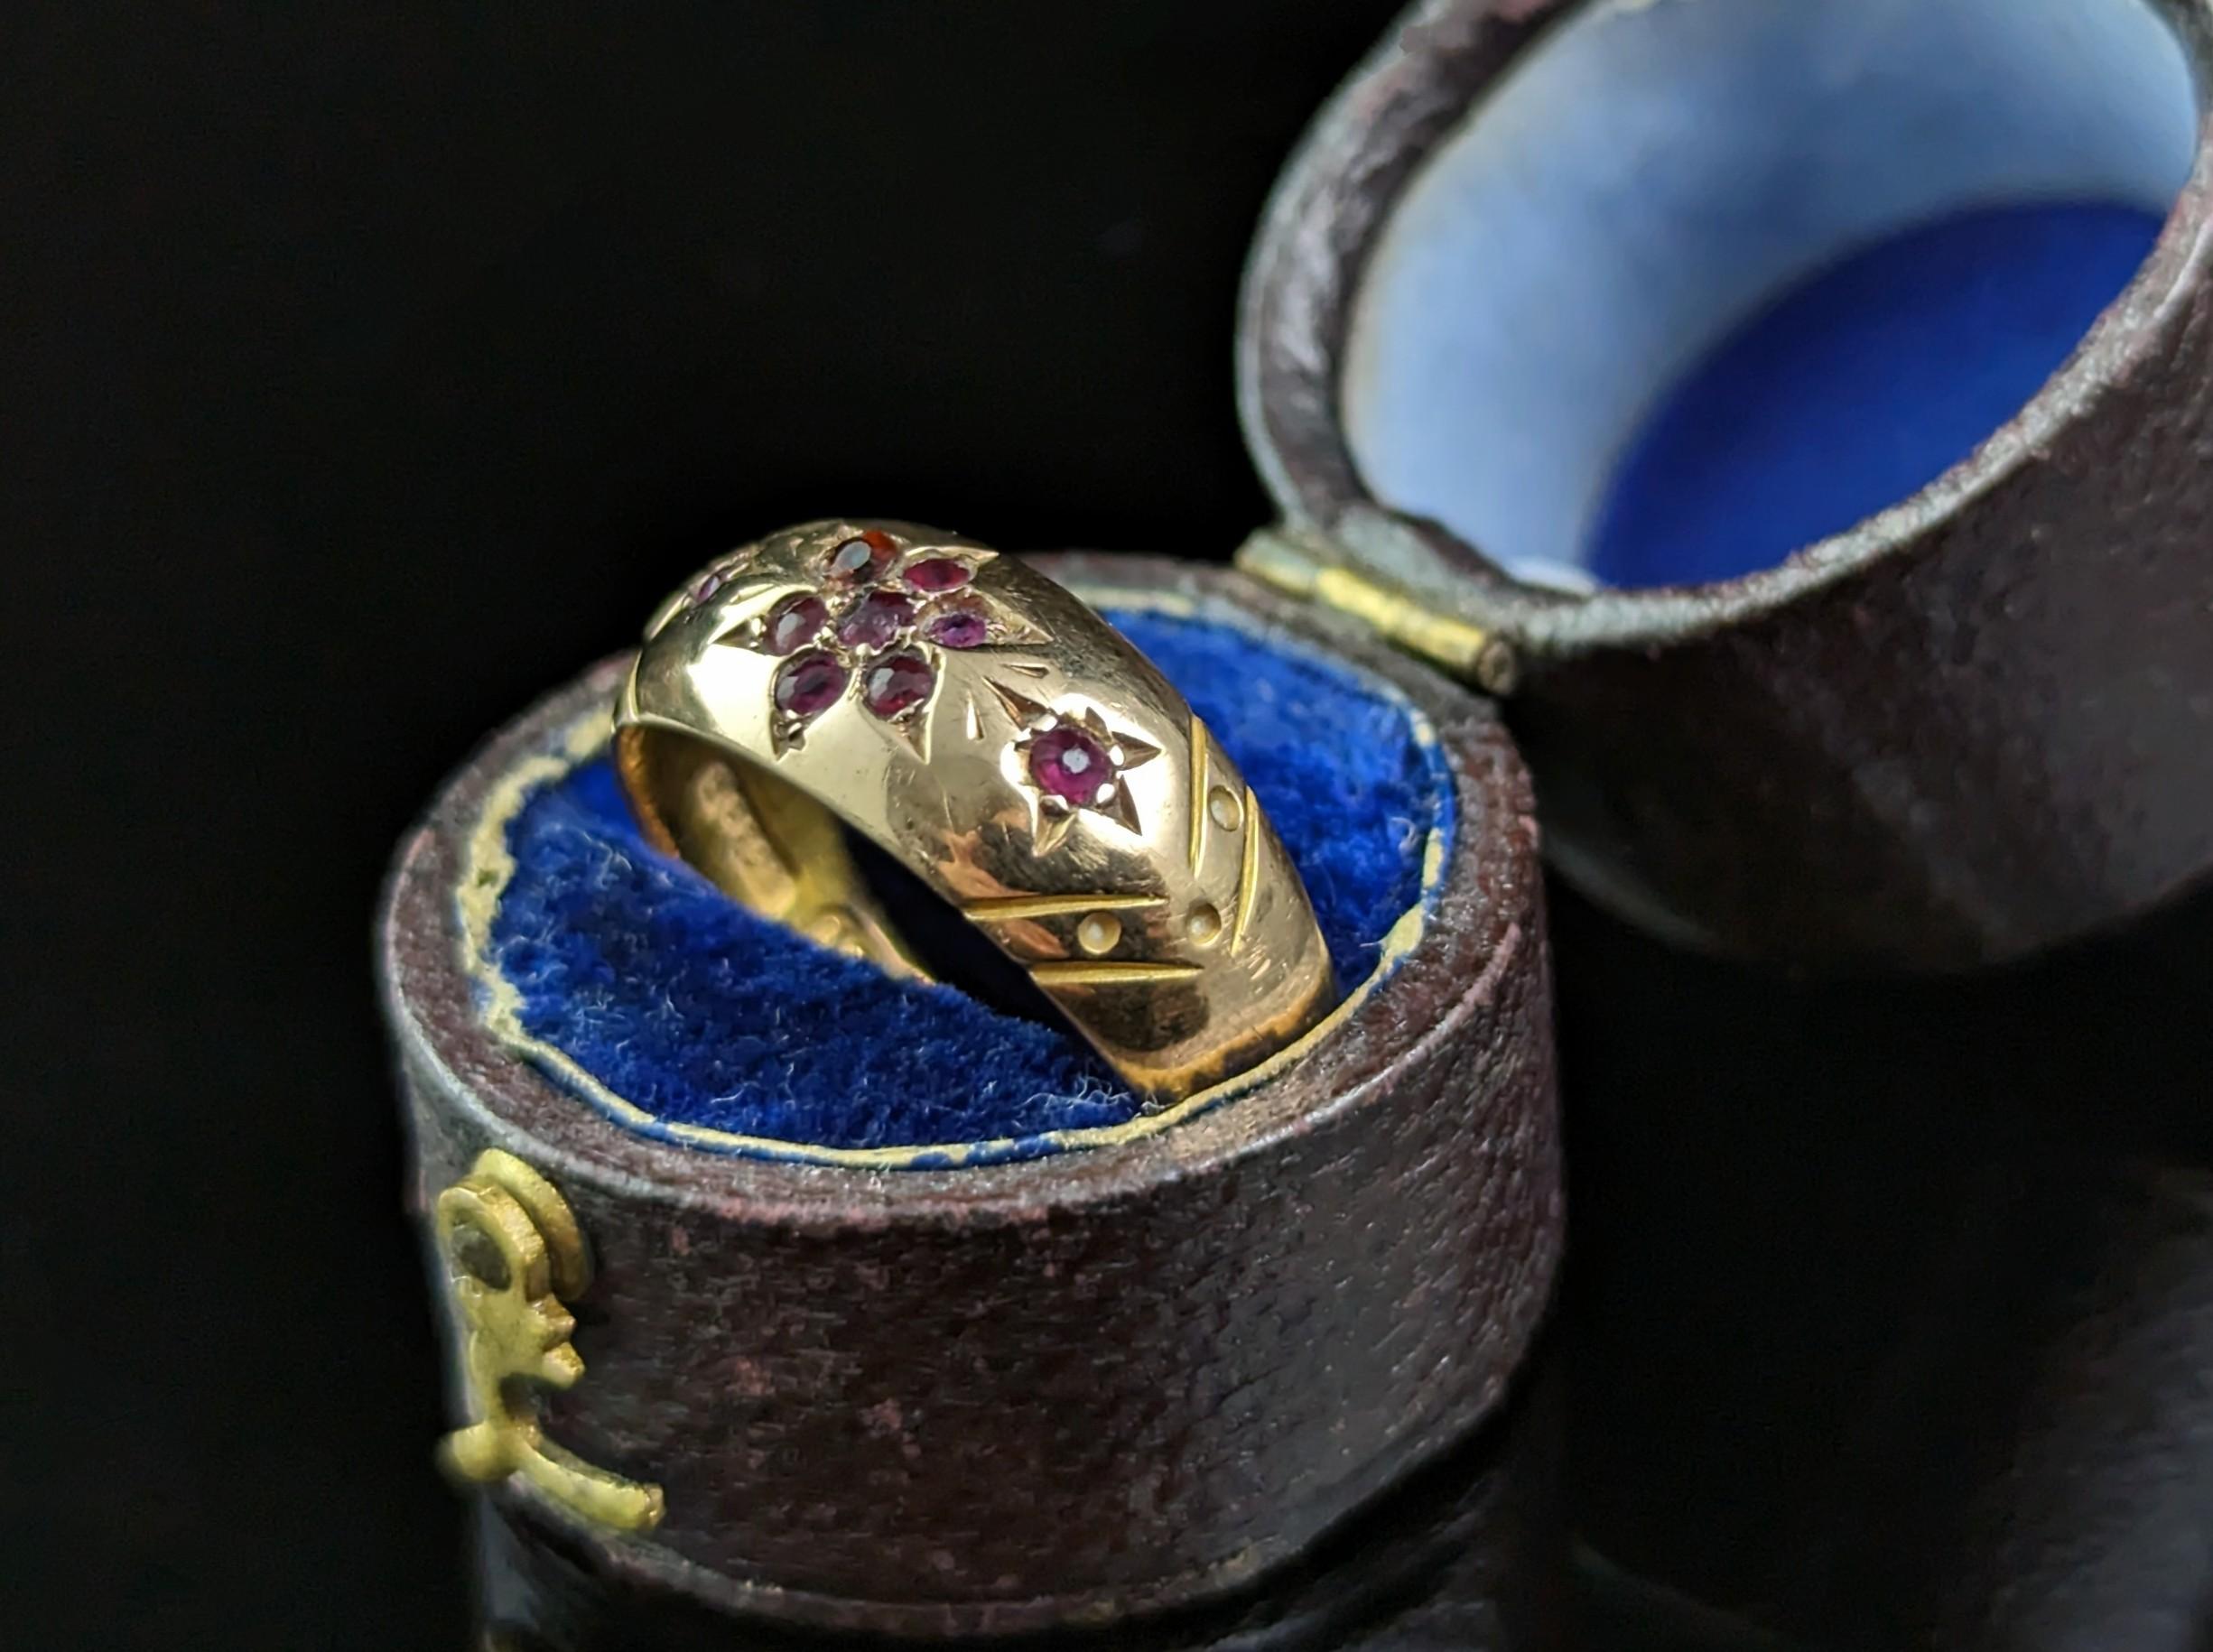 You can't help but be charmed by this sweet antique, Victorian era, Ruby Gypsy set ring in 18ct yellow gold.

One of our favourite styles here at StolenAttic and a firm customer favourite.

This beautiful ring is a multi stone, Gypsy set ring with a